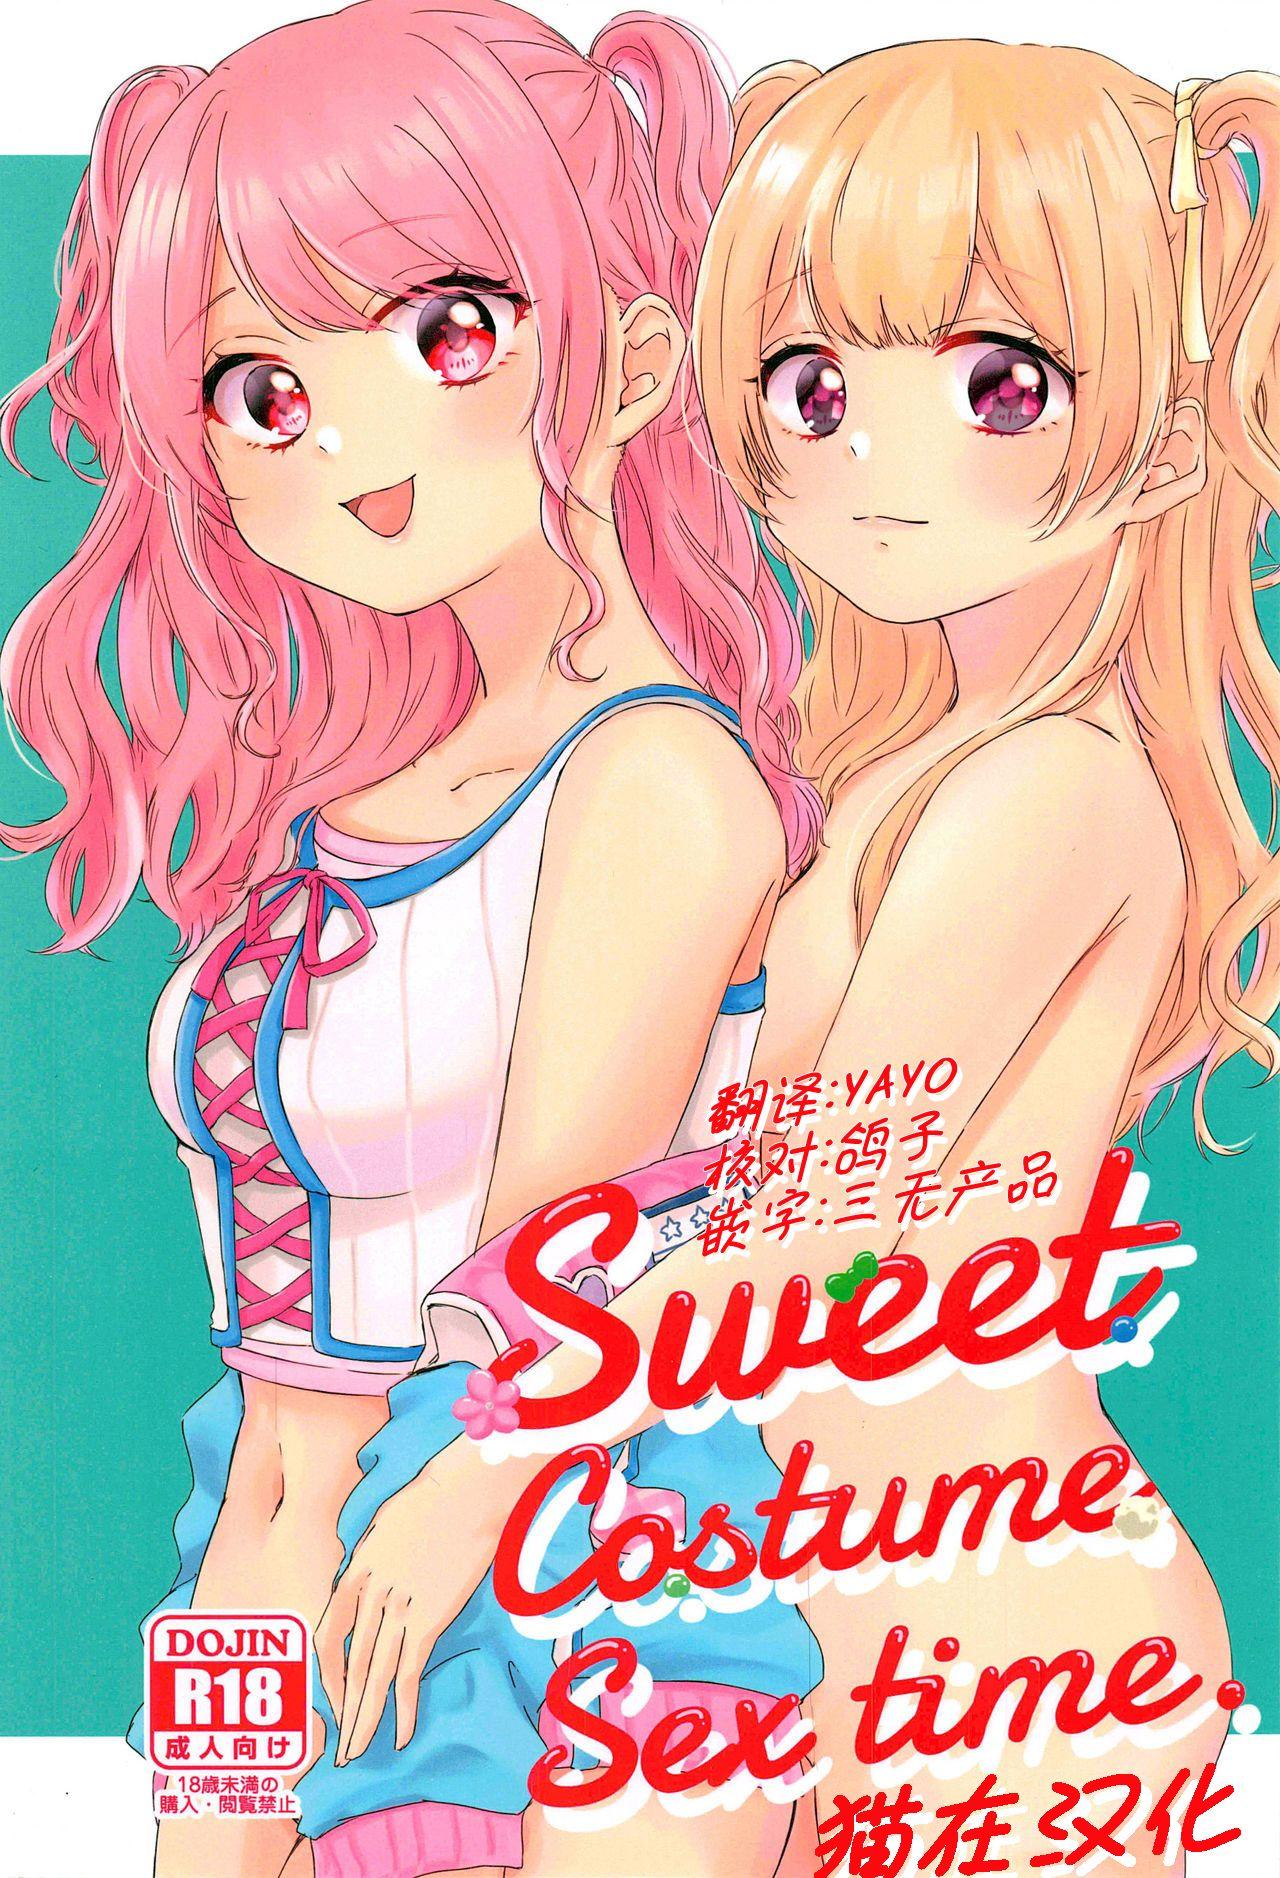 Boyfriend Sweet Costume Sex time. - Bang dream Tits - Picture 1